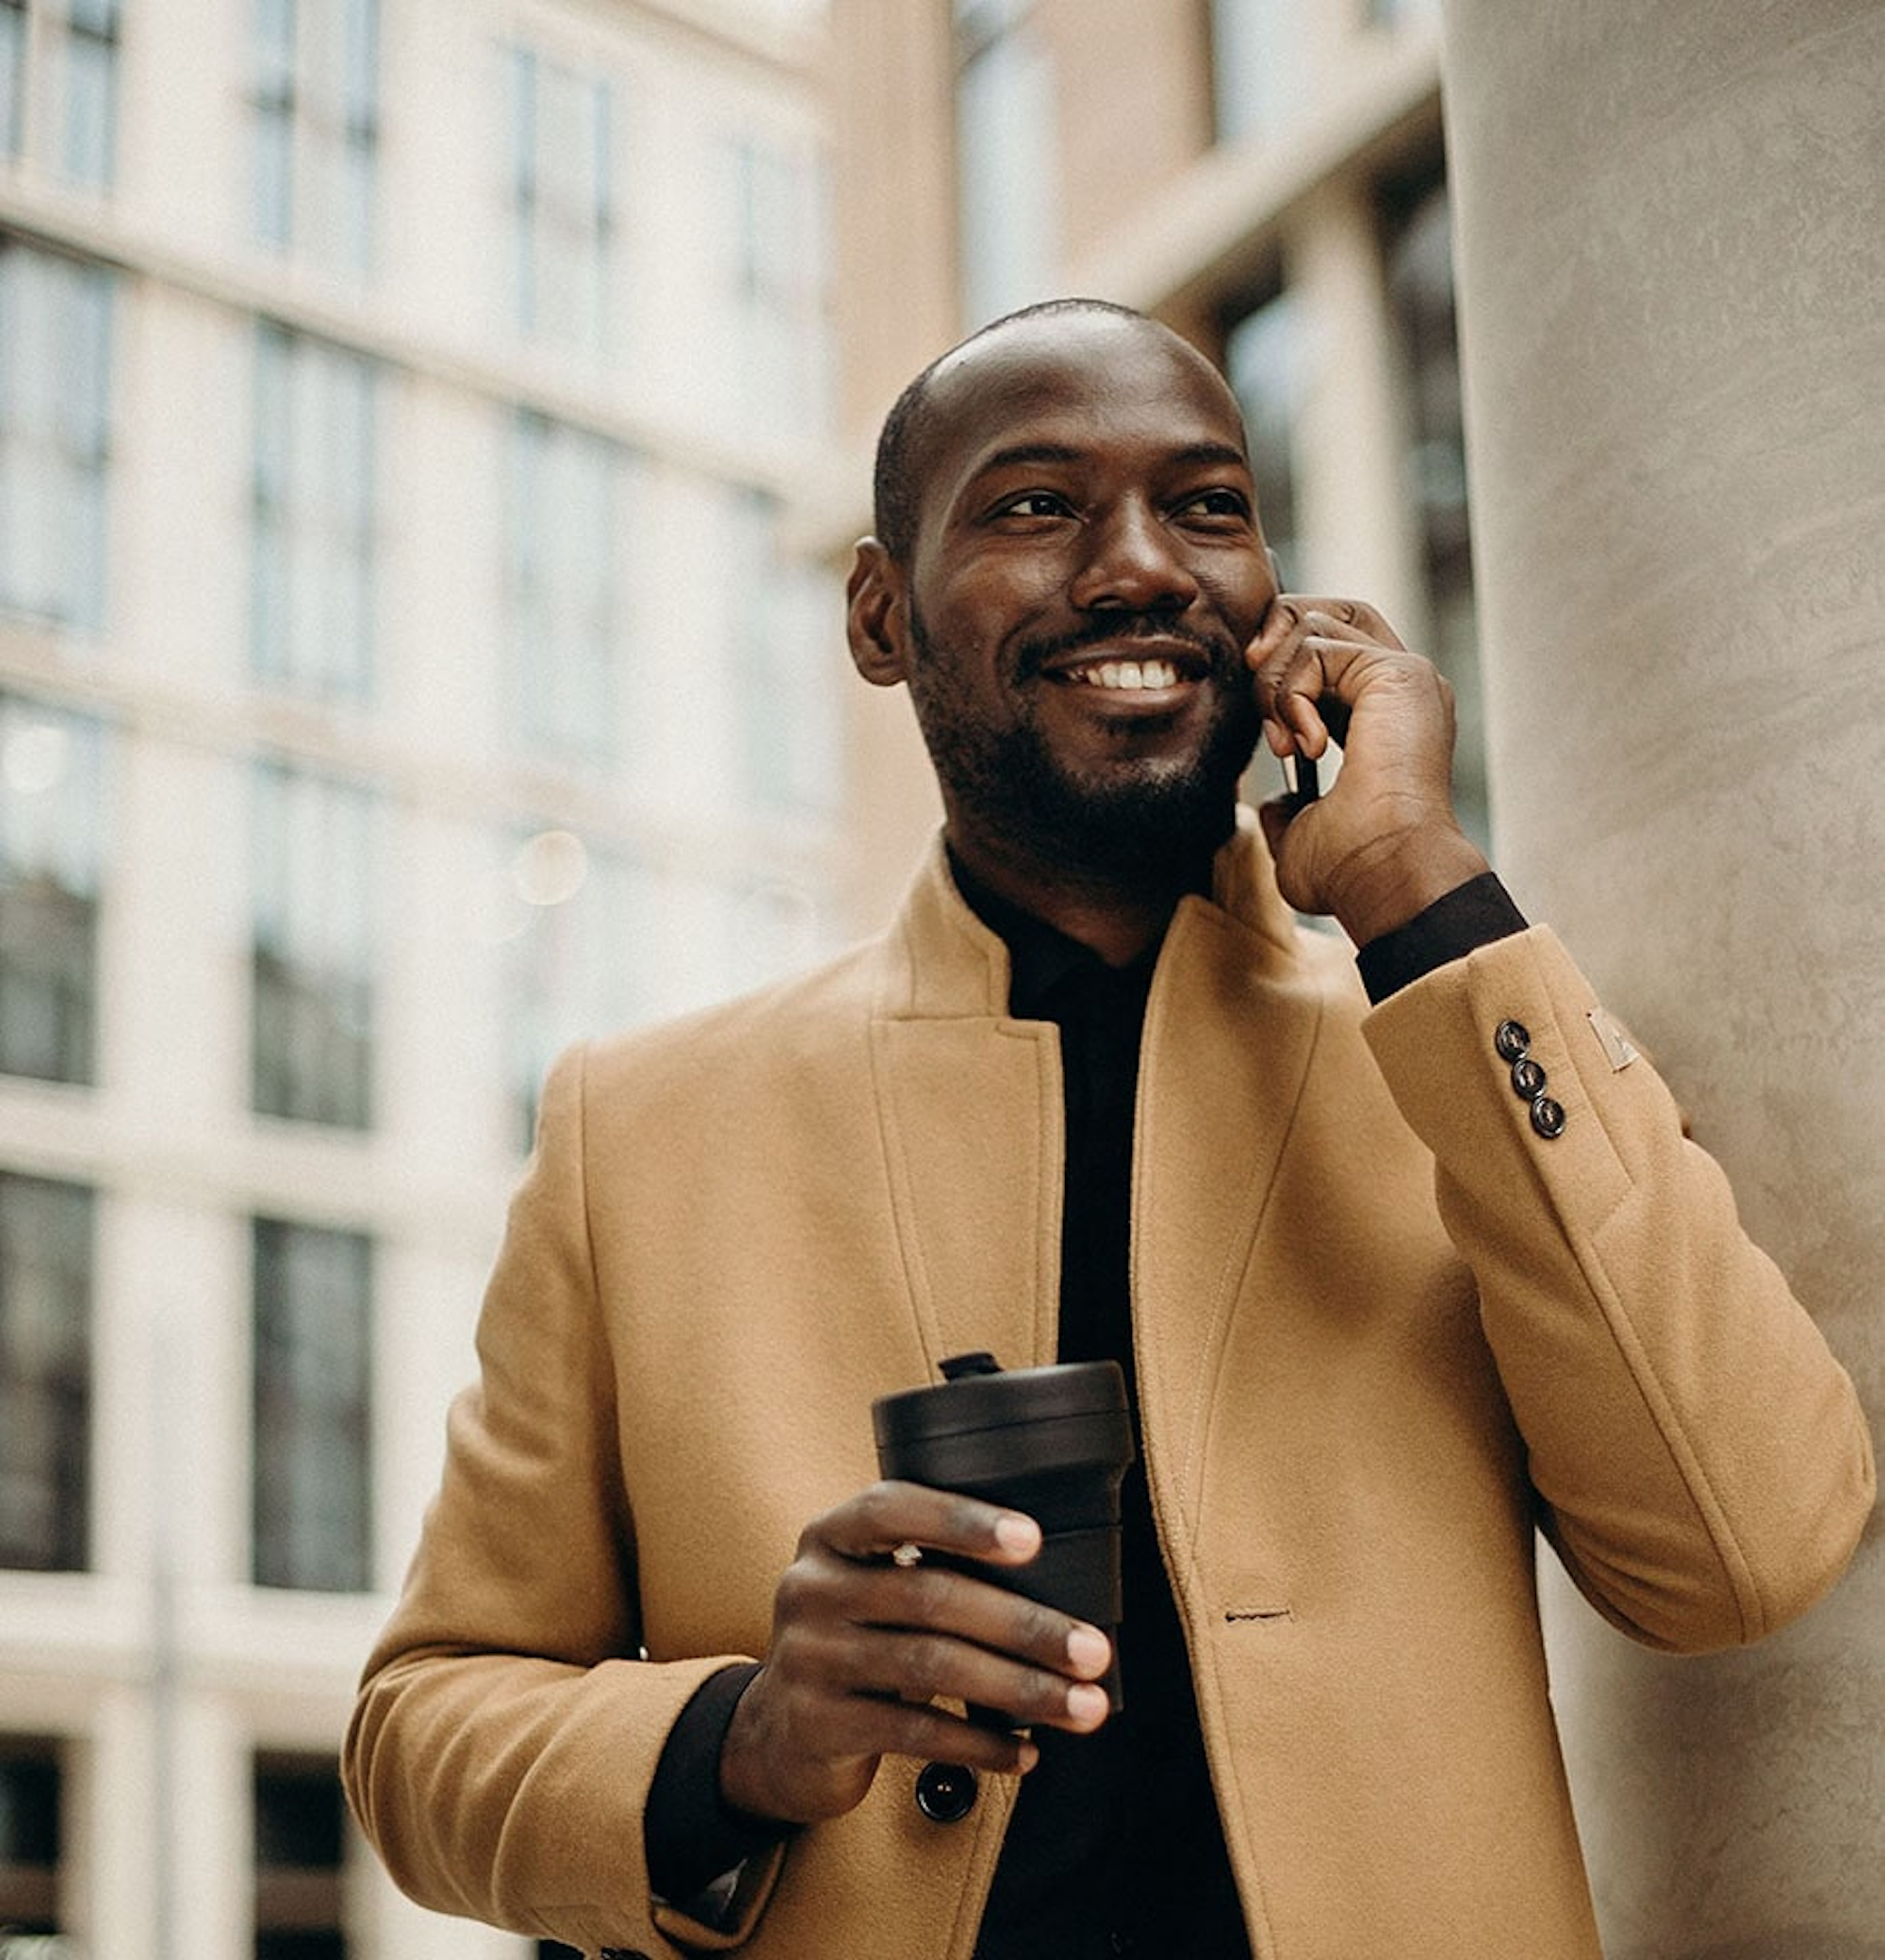 Smiling man with mobile phone to ear